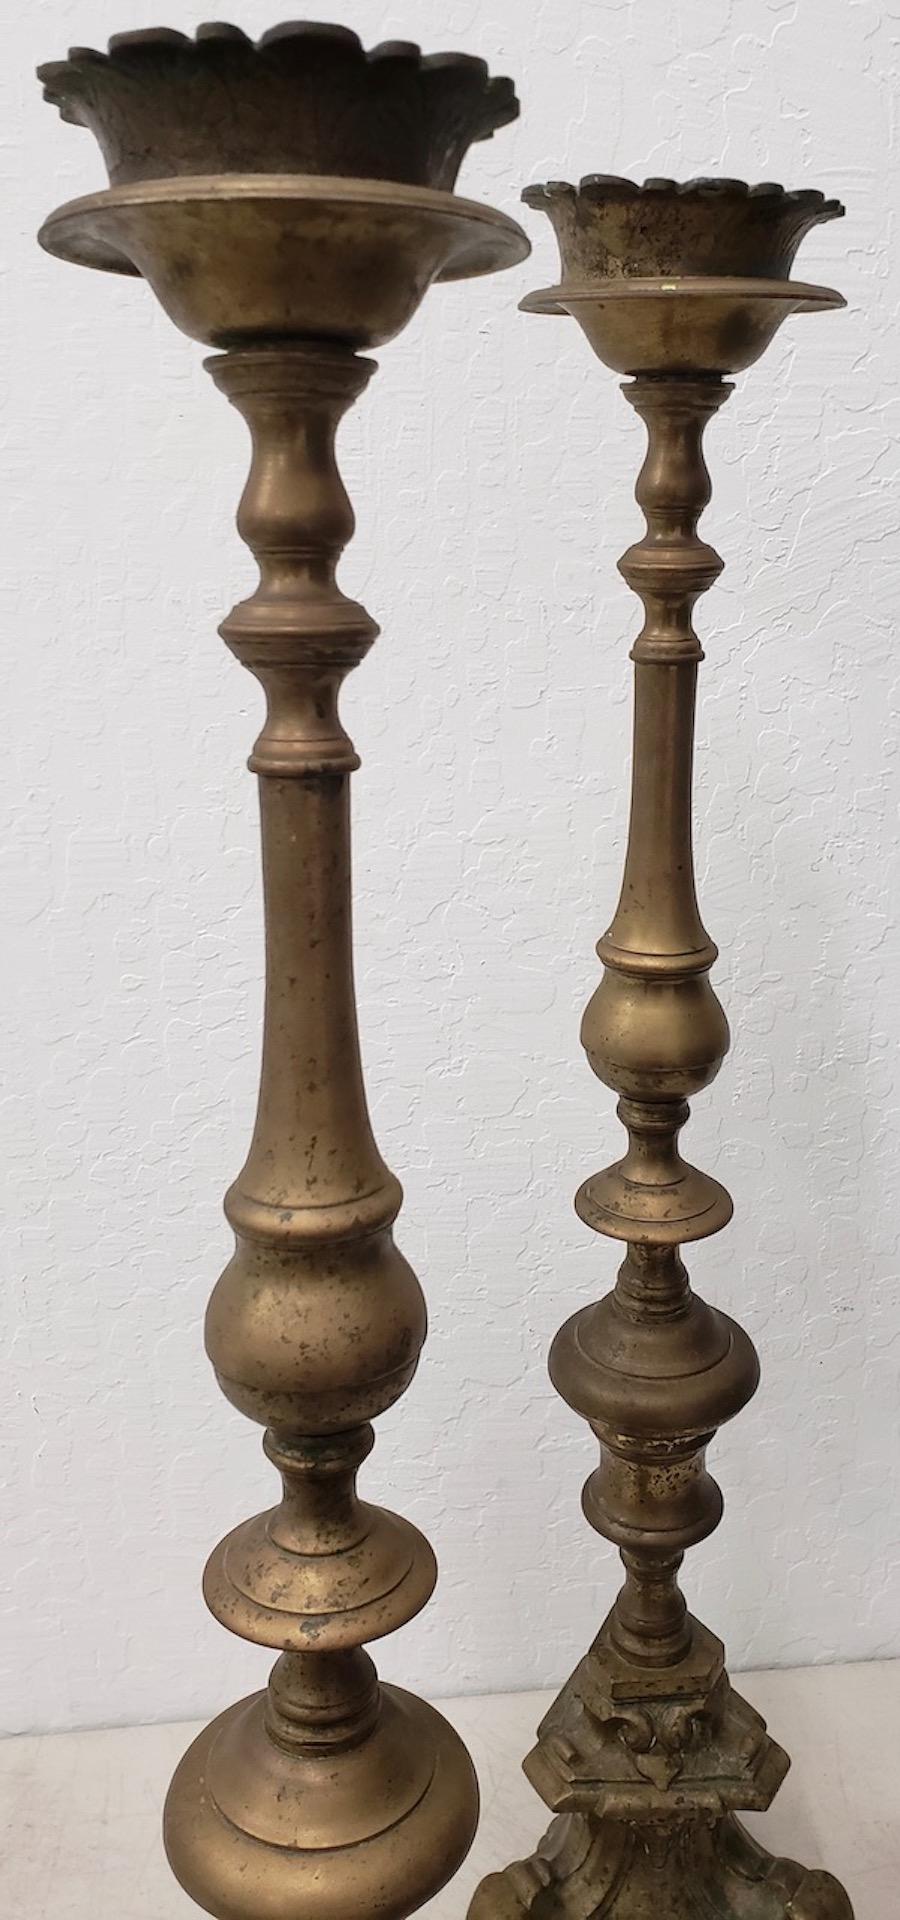 Pair of Early 18th Century Brass Altar / Mantel Candleholders, circa 1717 In Good Condition For Sale In San Francisco, CA